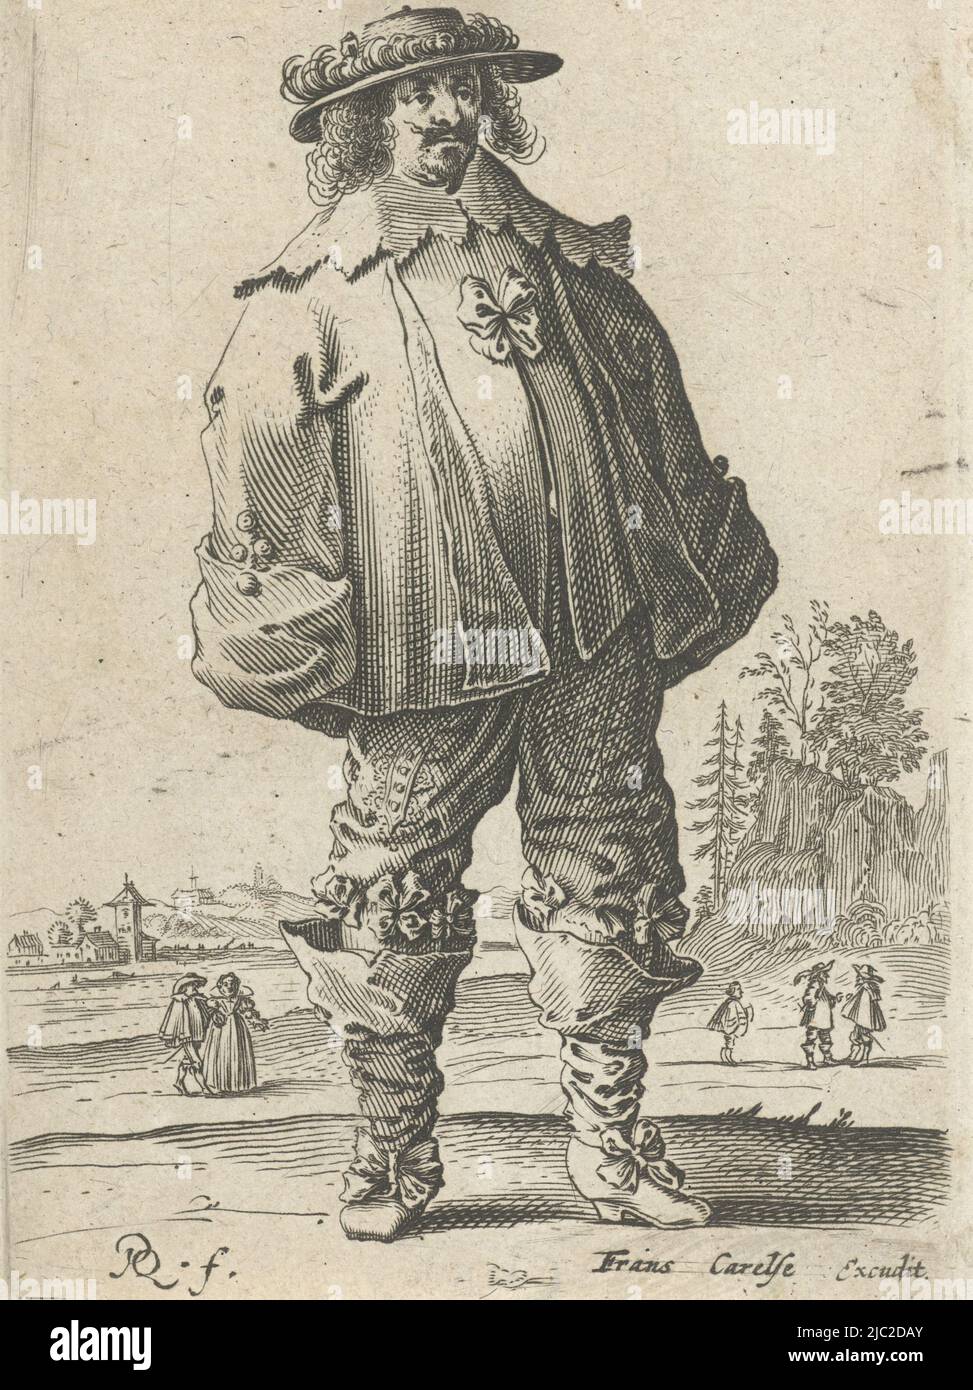 Standing man in a landscape, dressed according to the Dutch fashion circa 1625- '35. In the background the outlines of a village and several figures, Man in fashionable dress, print maker: Pieter Jansz. Quast, (mentioned on object), publisher: Frans Carelse, (mentioned on object), print maker: Netherlands, publisher: Amsterdam, 1665 - 1647, paper, engraving, h 141 mm × w 94 mm Stock Photo